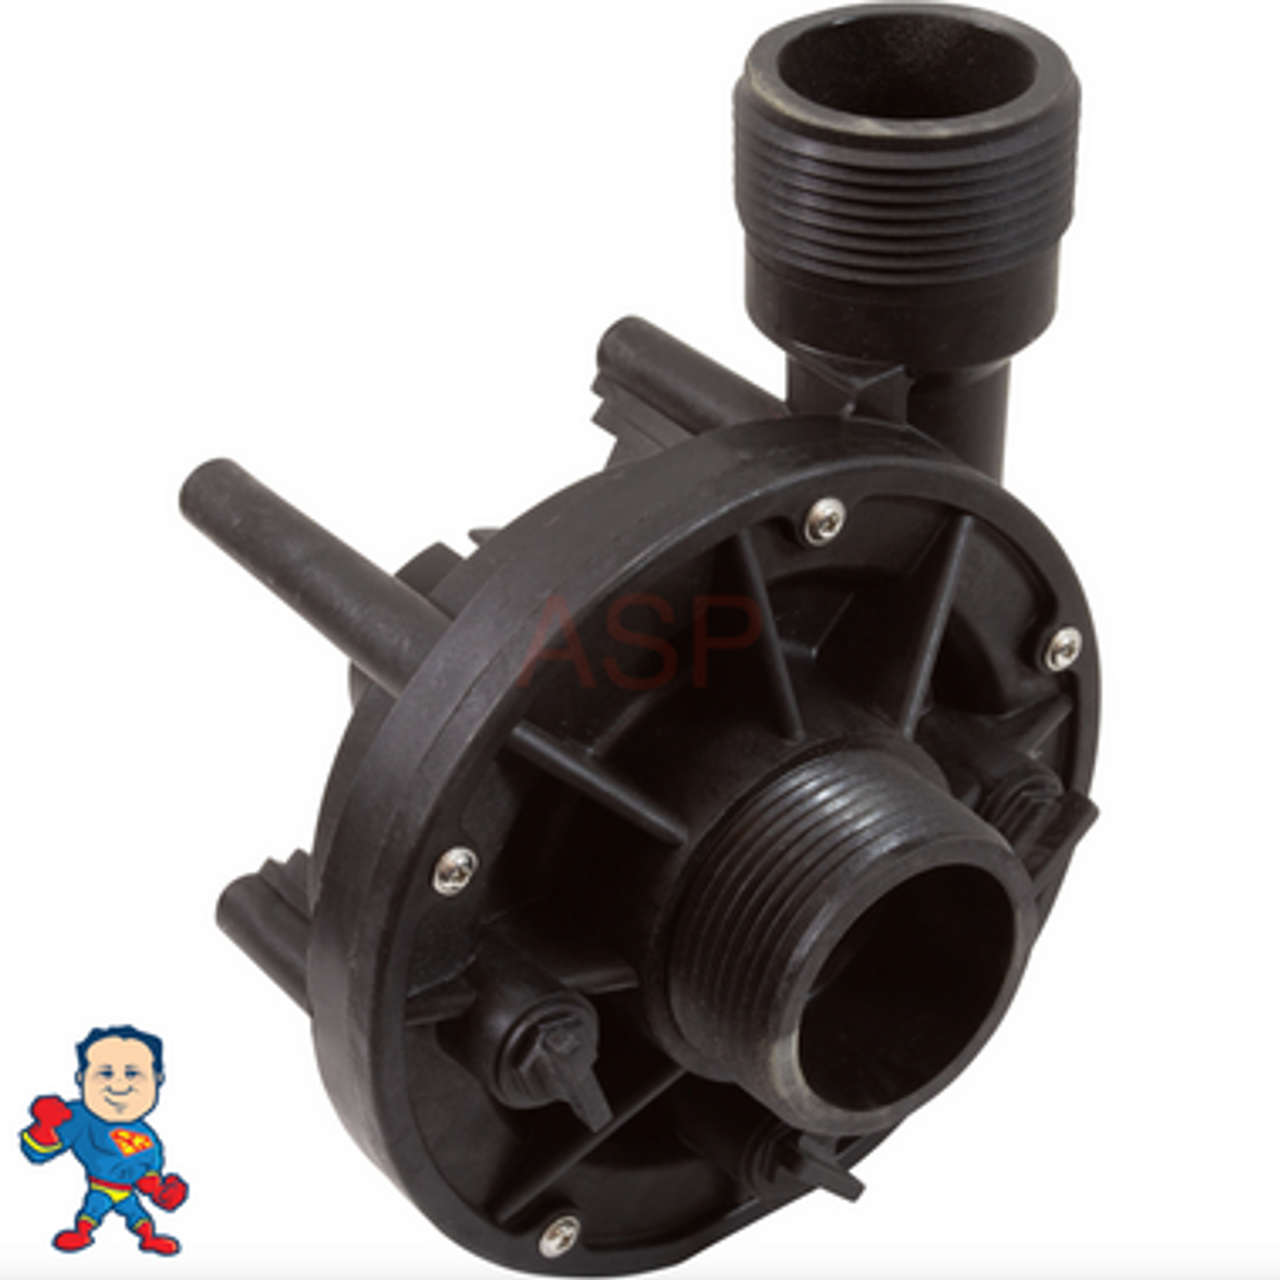 Wet End for Circulation Pump, LX 48WTC, 1/8HP, 115 or 230V, 1.6 or 0.8A, 1-1/2"MBT, Side Discharge